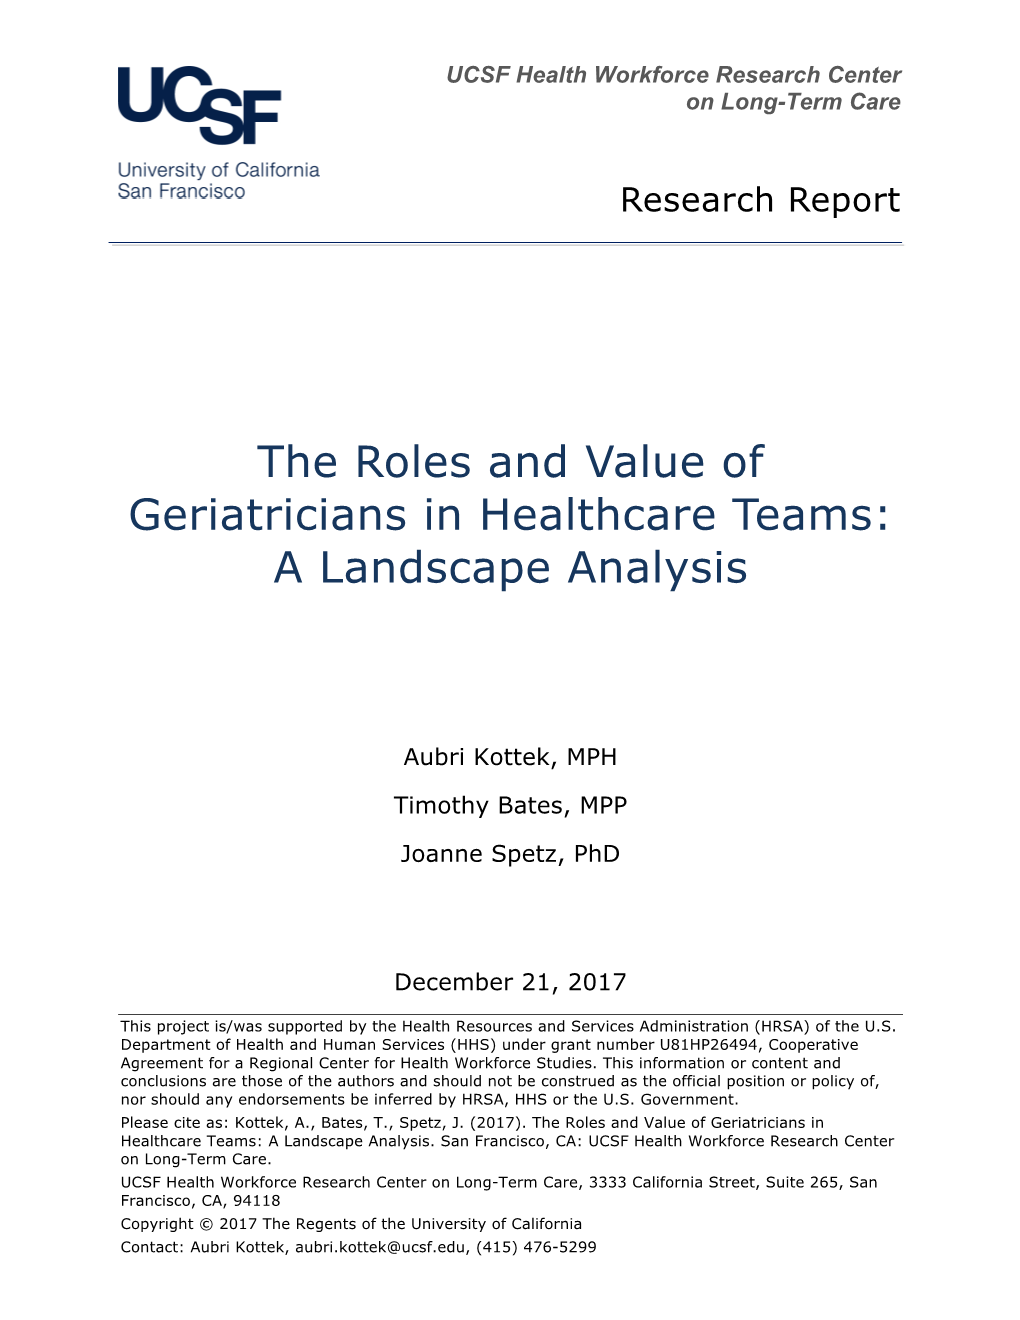 The Roles and Value of Geriatricians in Healthcare Teams: a Landscape Analysis